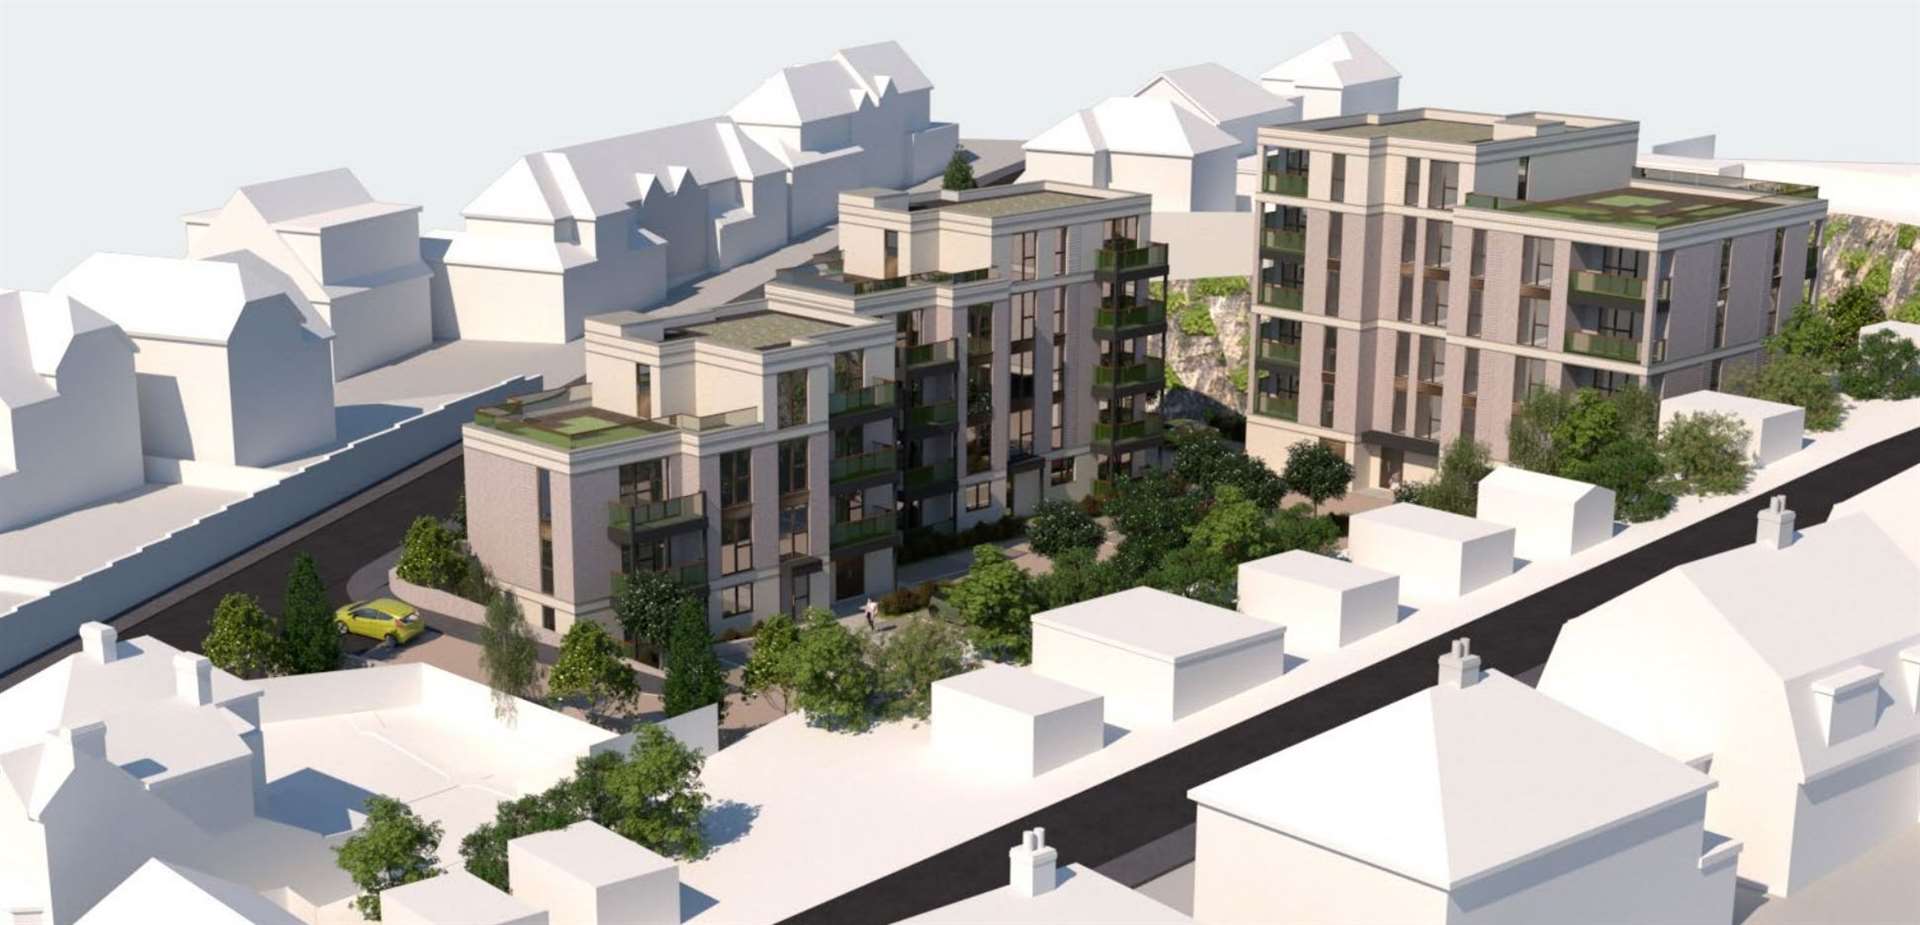 Medway Council have received plans to build 33 flats in Strood. Picture: Ubique Architects